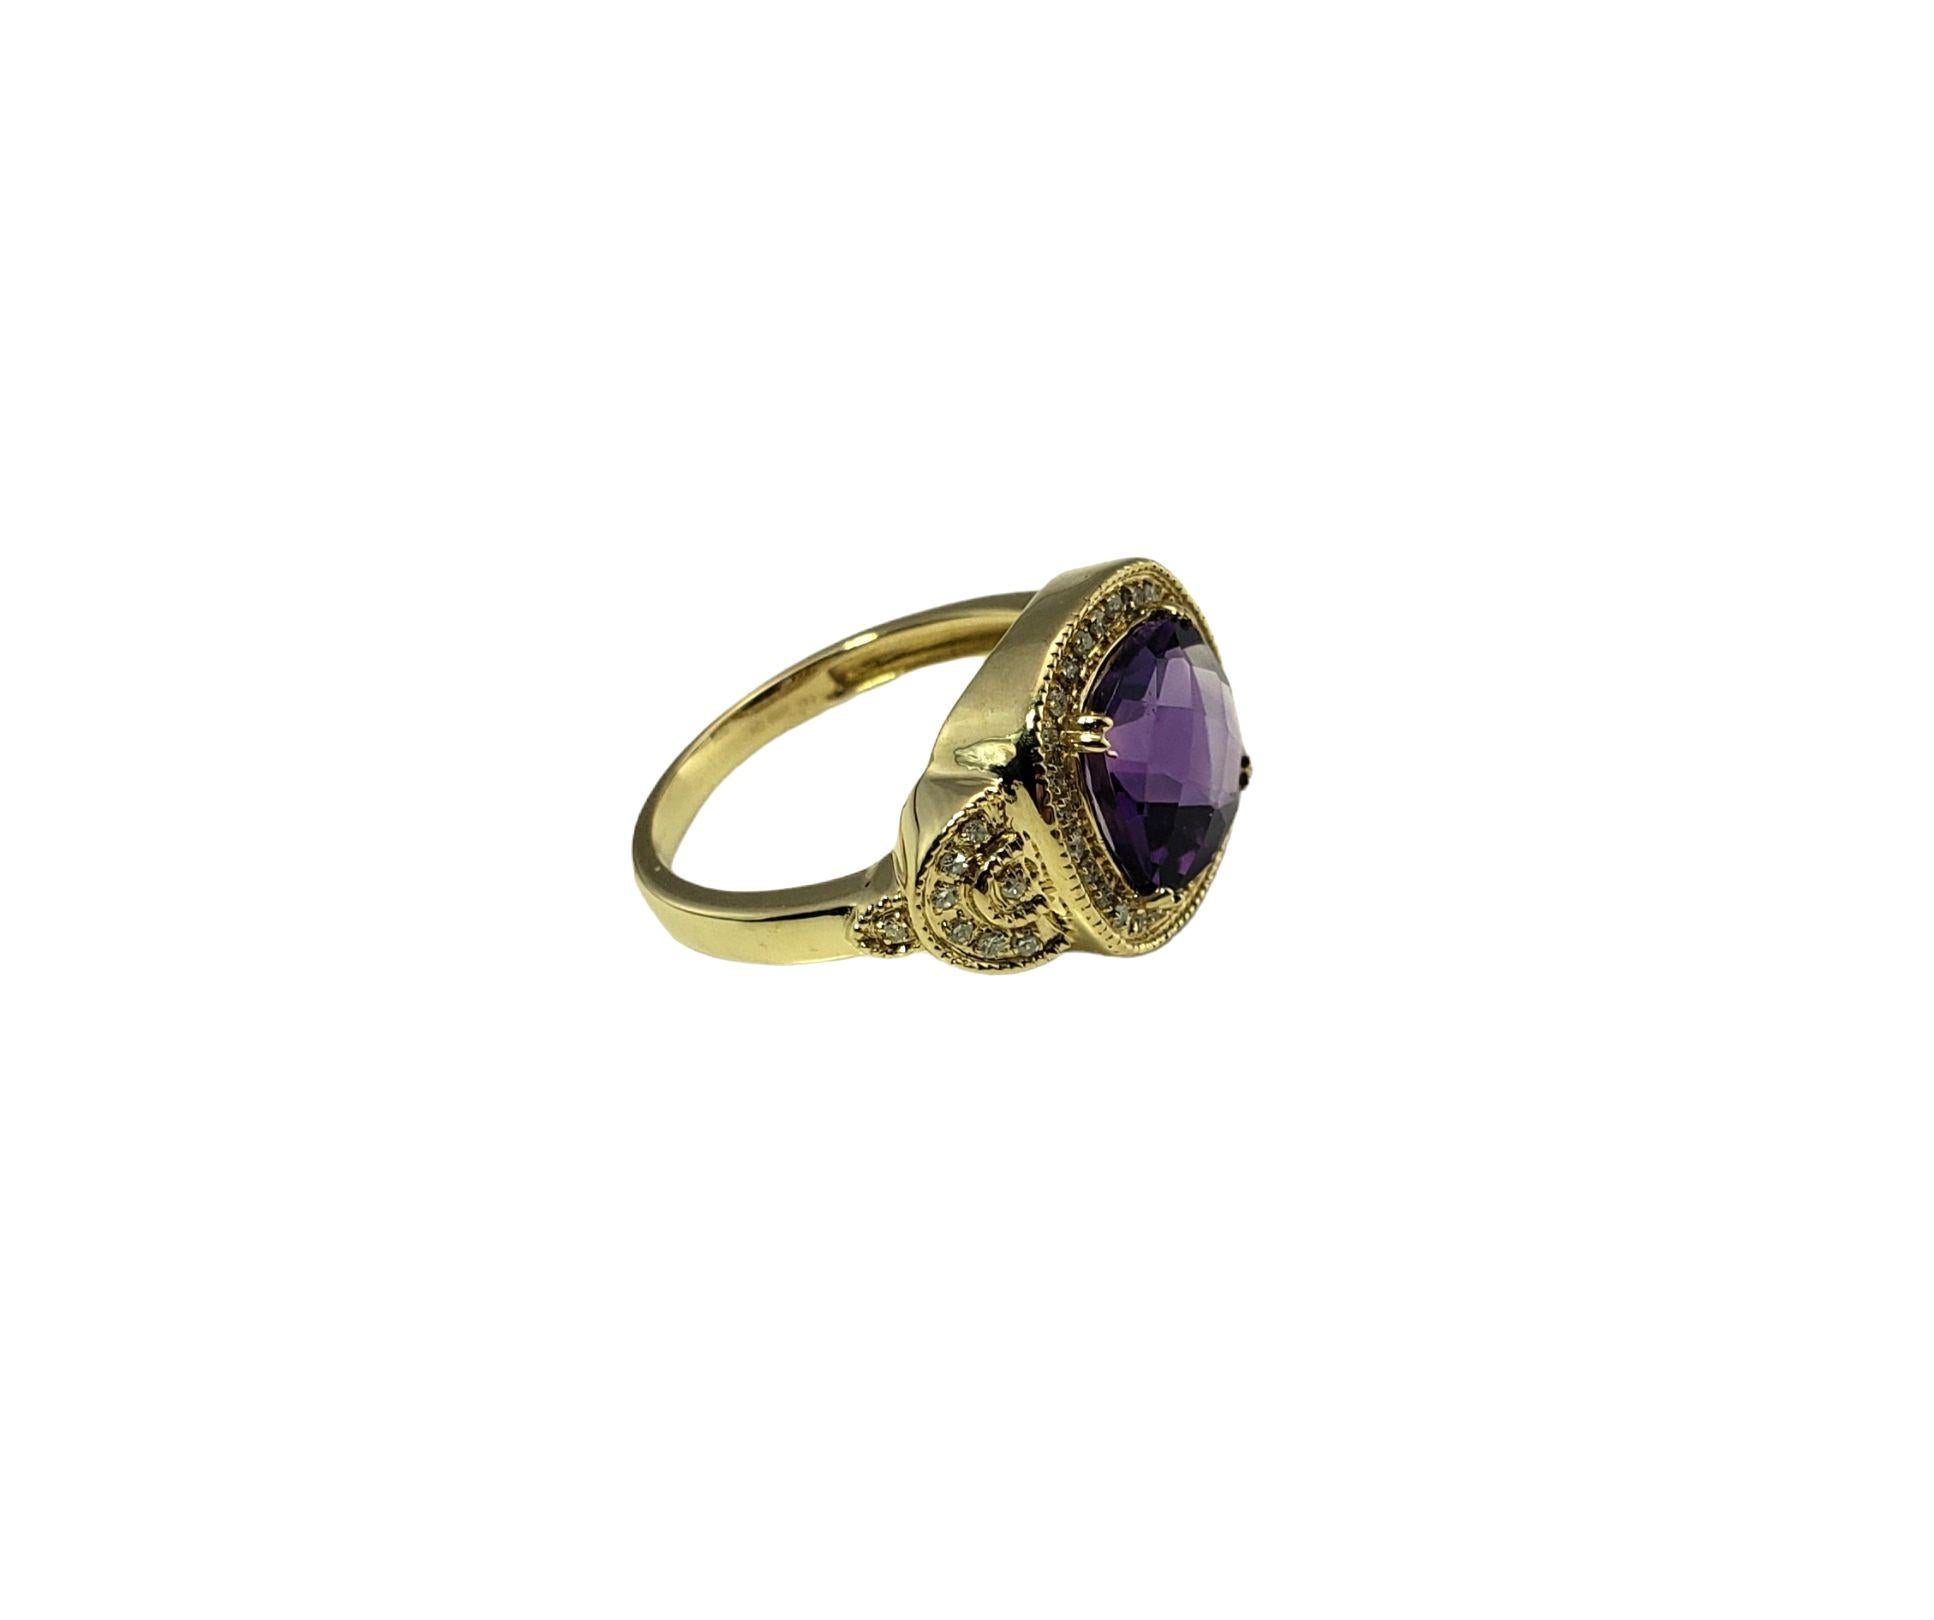 Vintage 14 Karat Yellow Gold Amethyst and Diamond Ring Size 7.75-

This stunning ring features one cushion cut amethyst (9 mm x 9 mm) and 43 round single cut diamonds set beautifully detailed yellow gold. Width: 13 mm. Shank: 2 mm.

Approximate